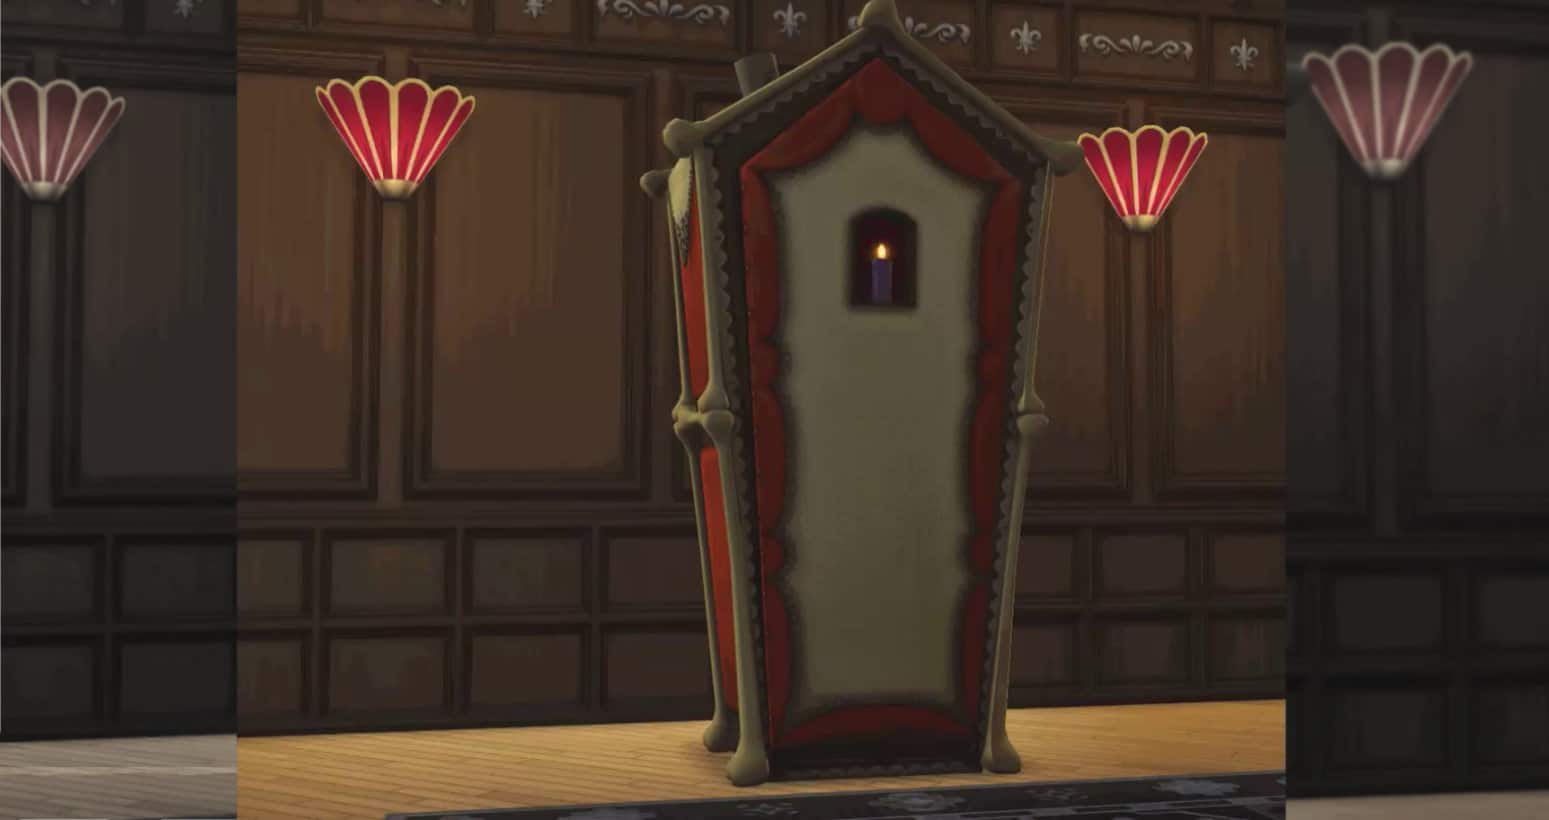 Bonehilda is getting her coffin back in The Sims 4